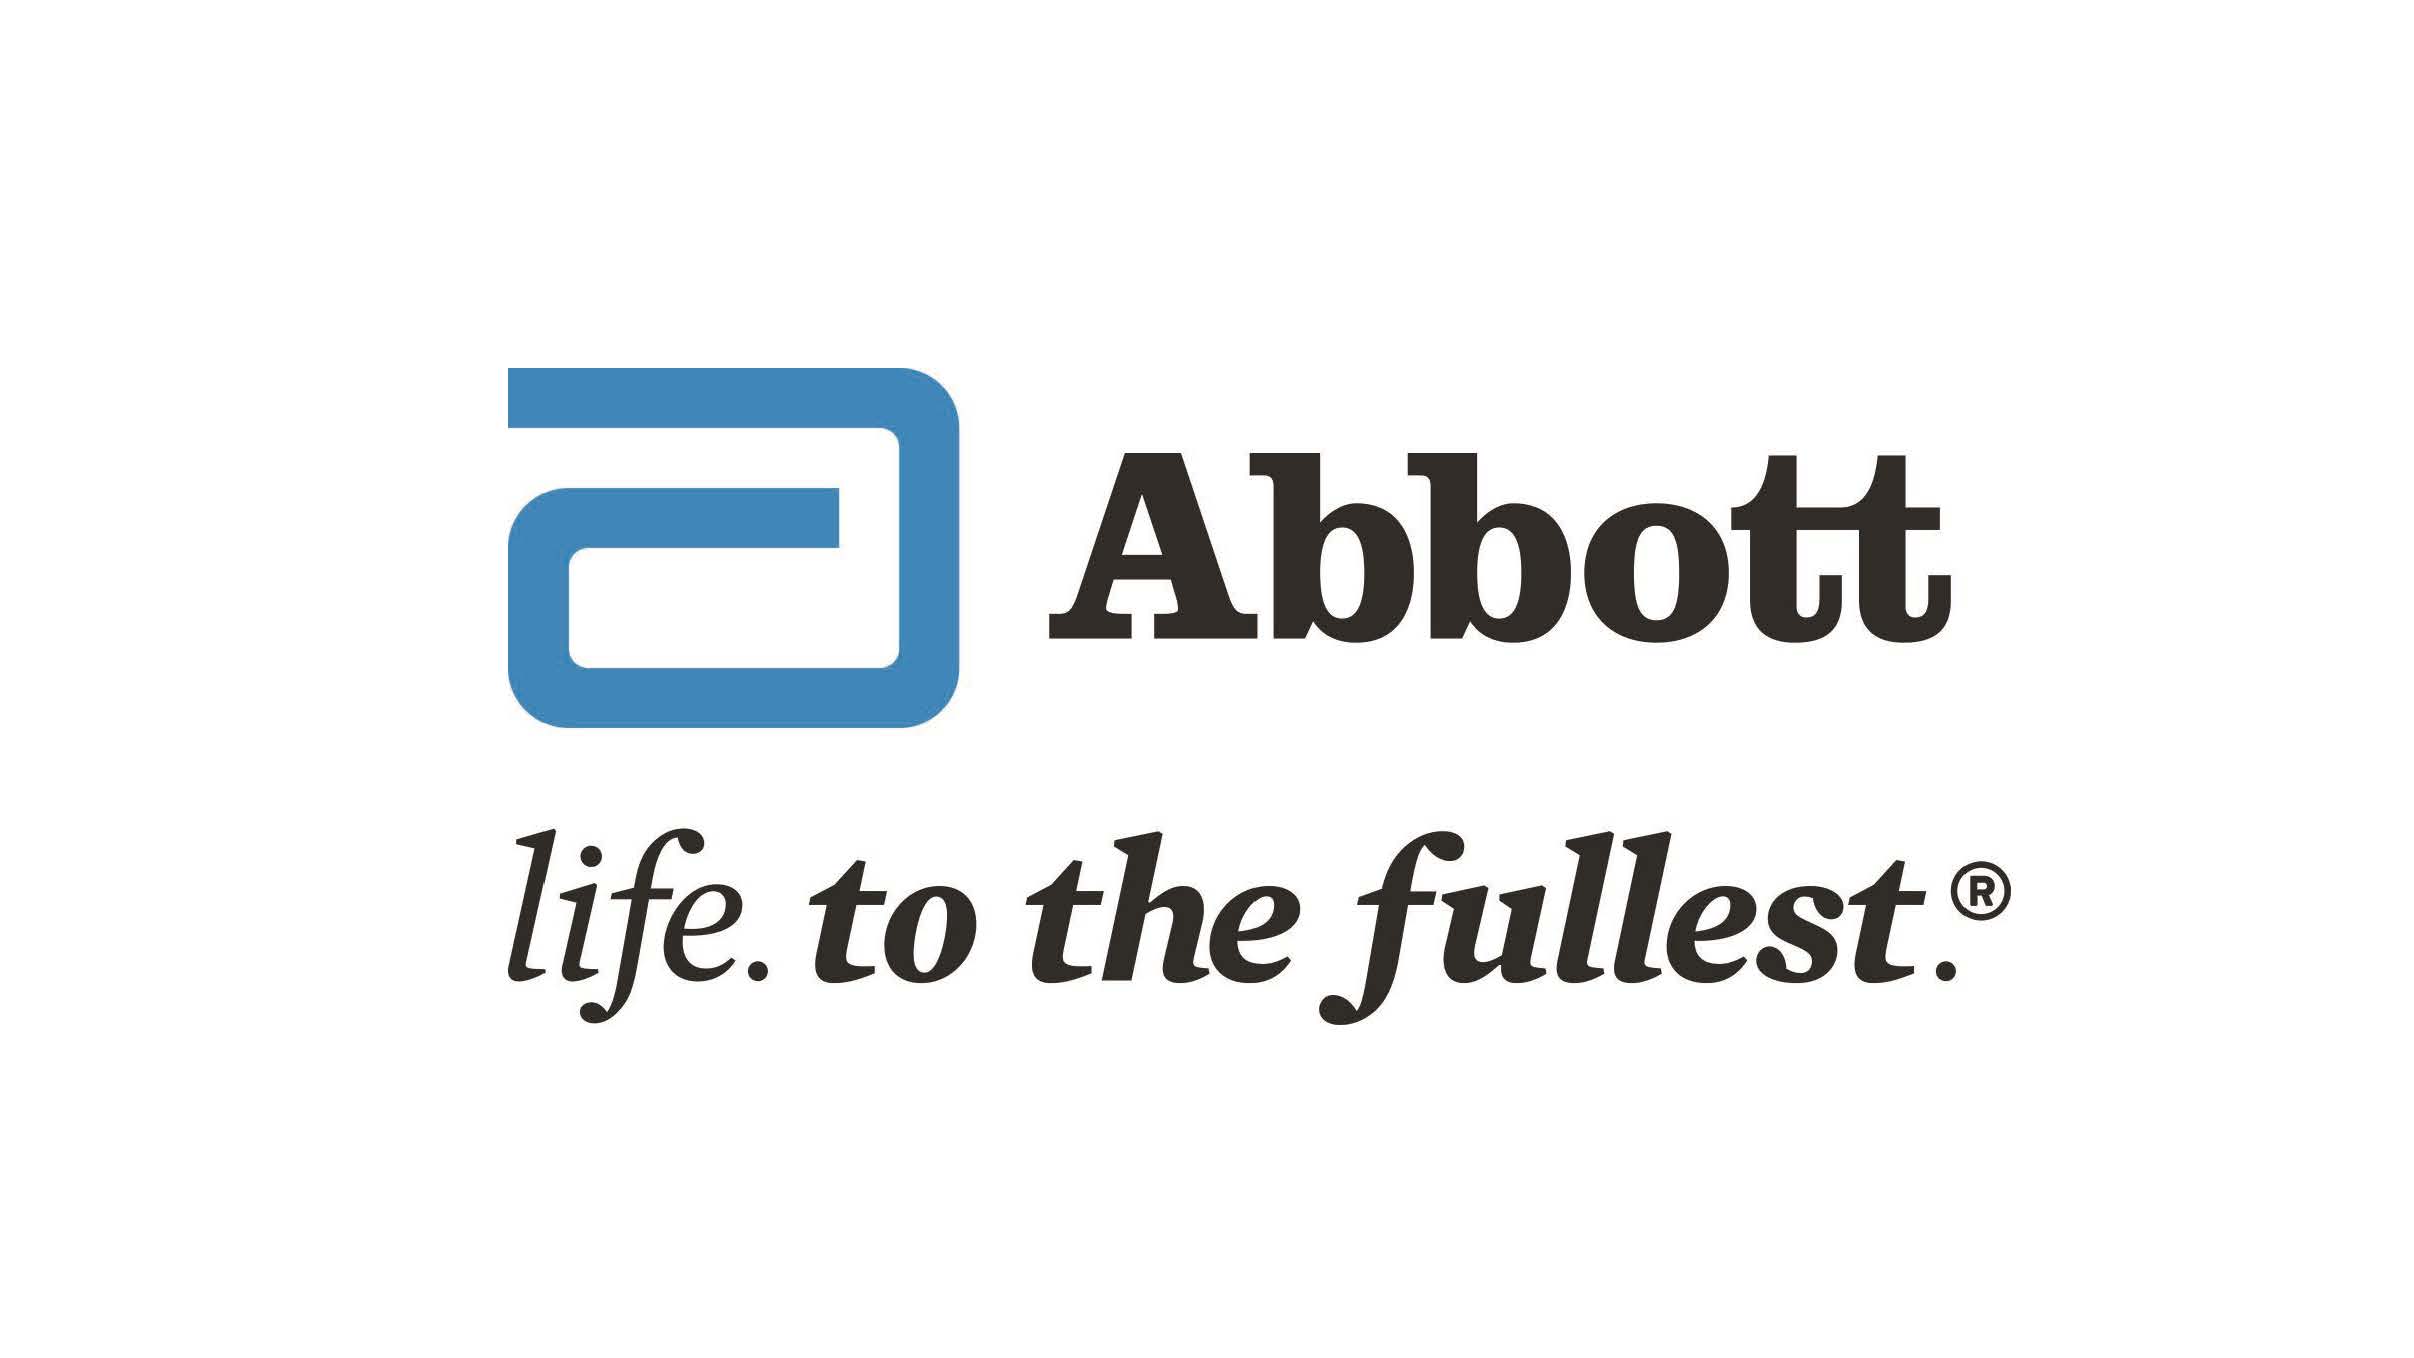 15 Facts About Abbott - Facts.net